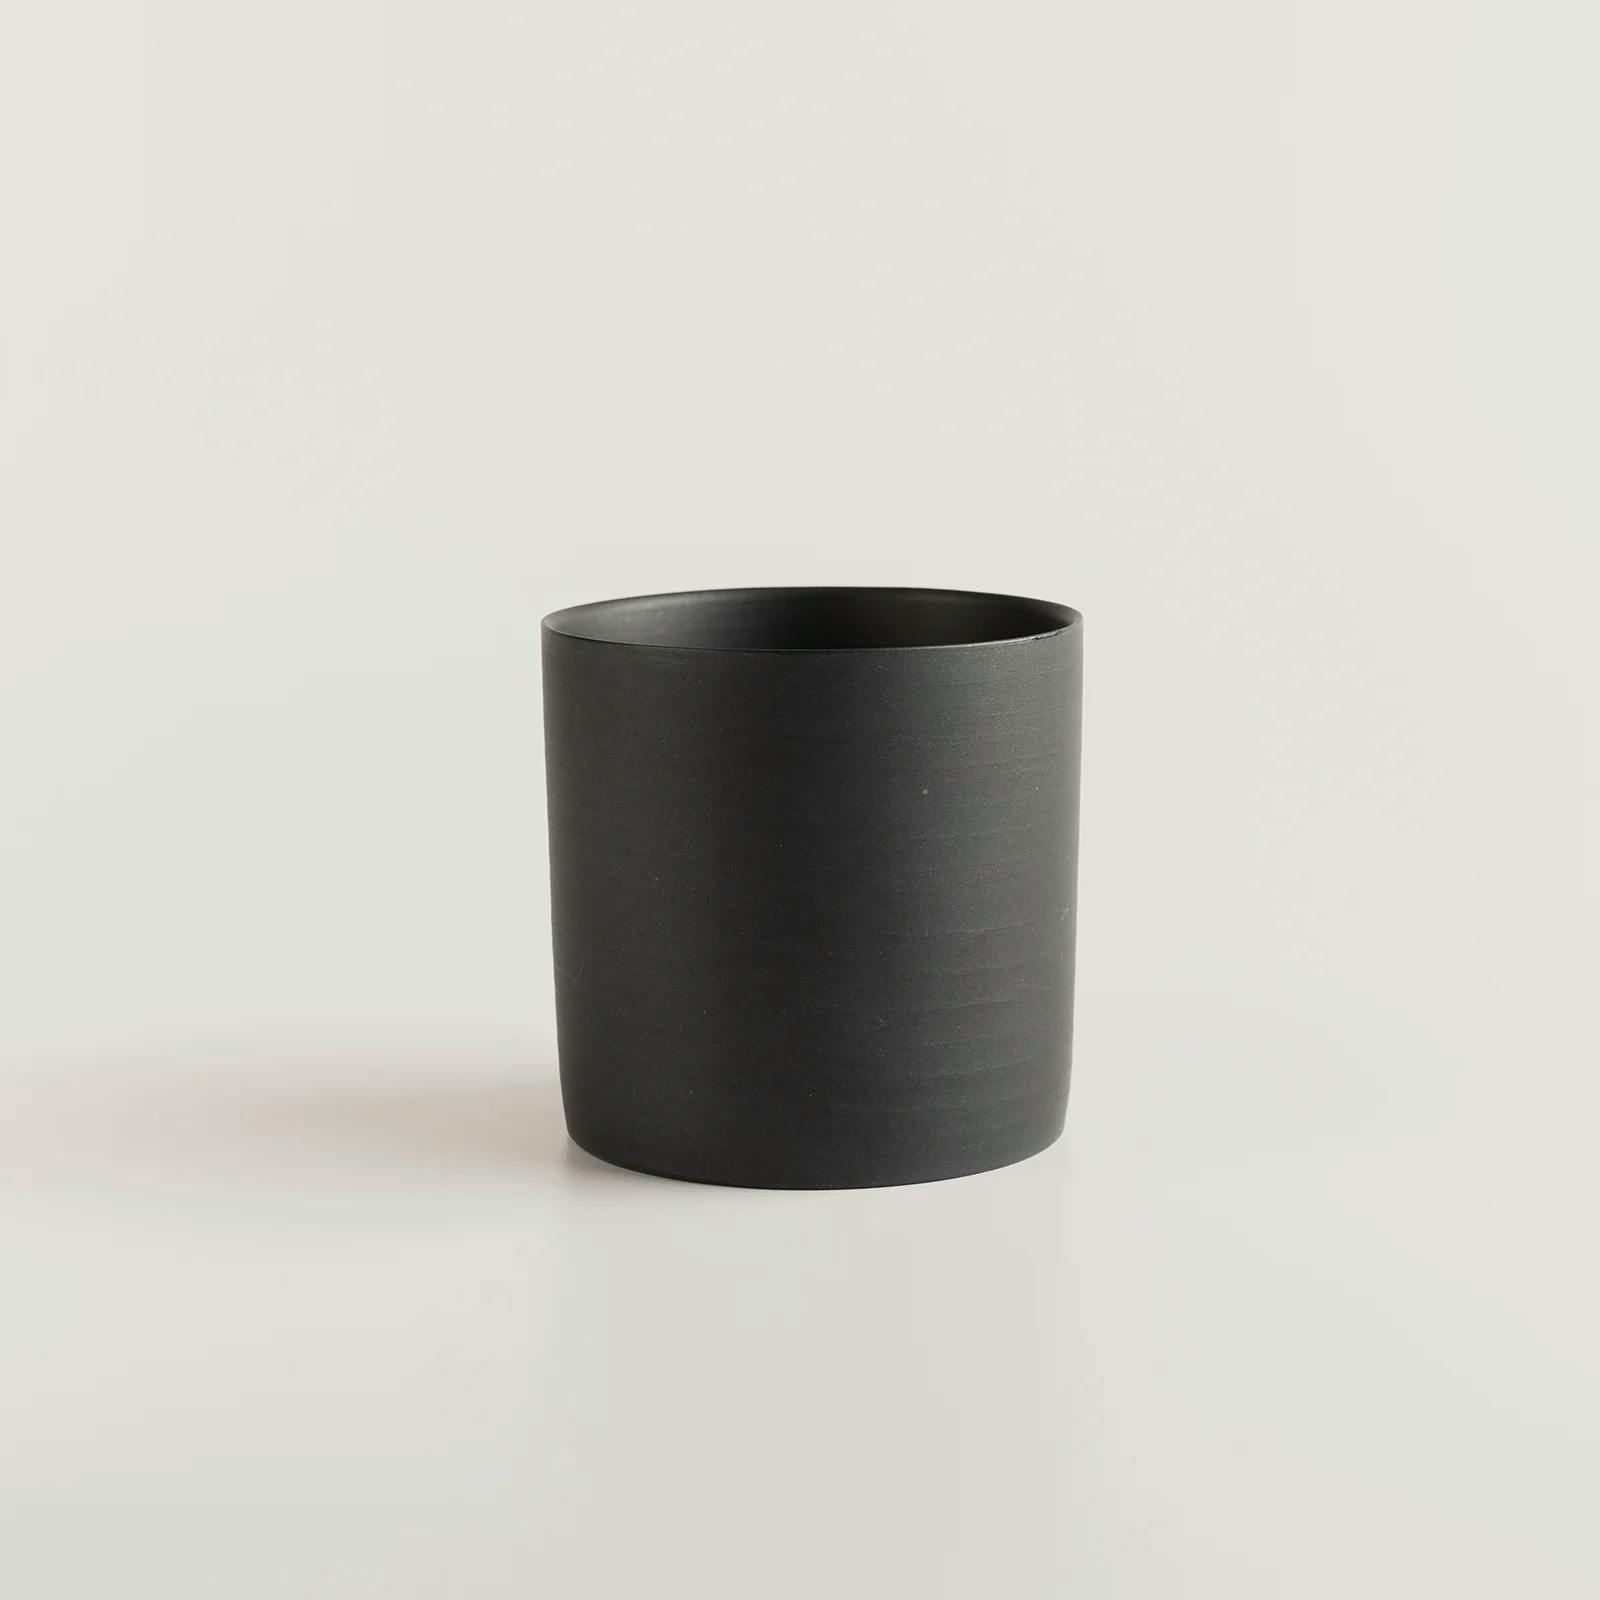 Image of Nankei cylinder cups in black